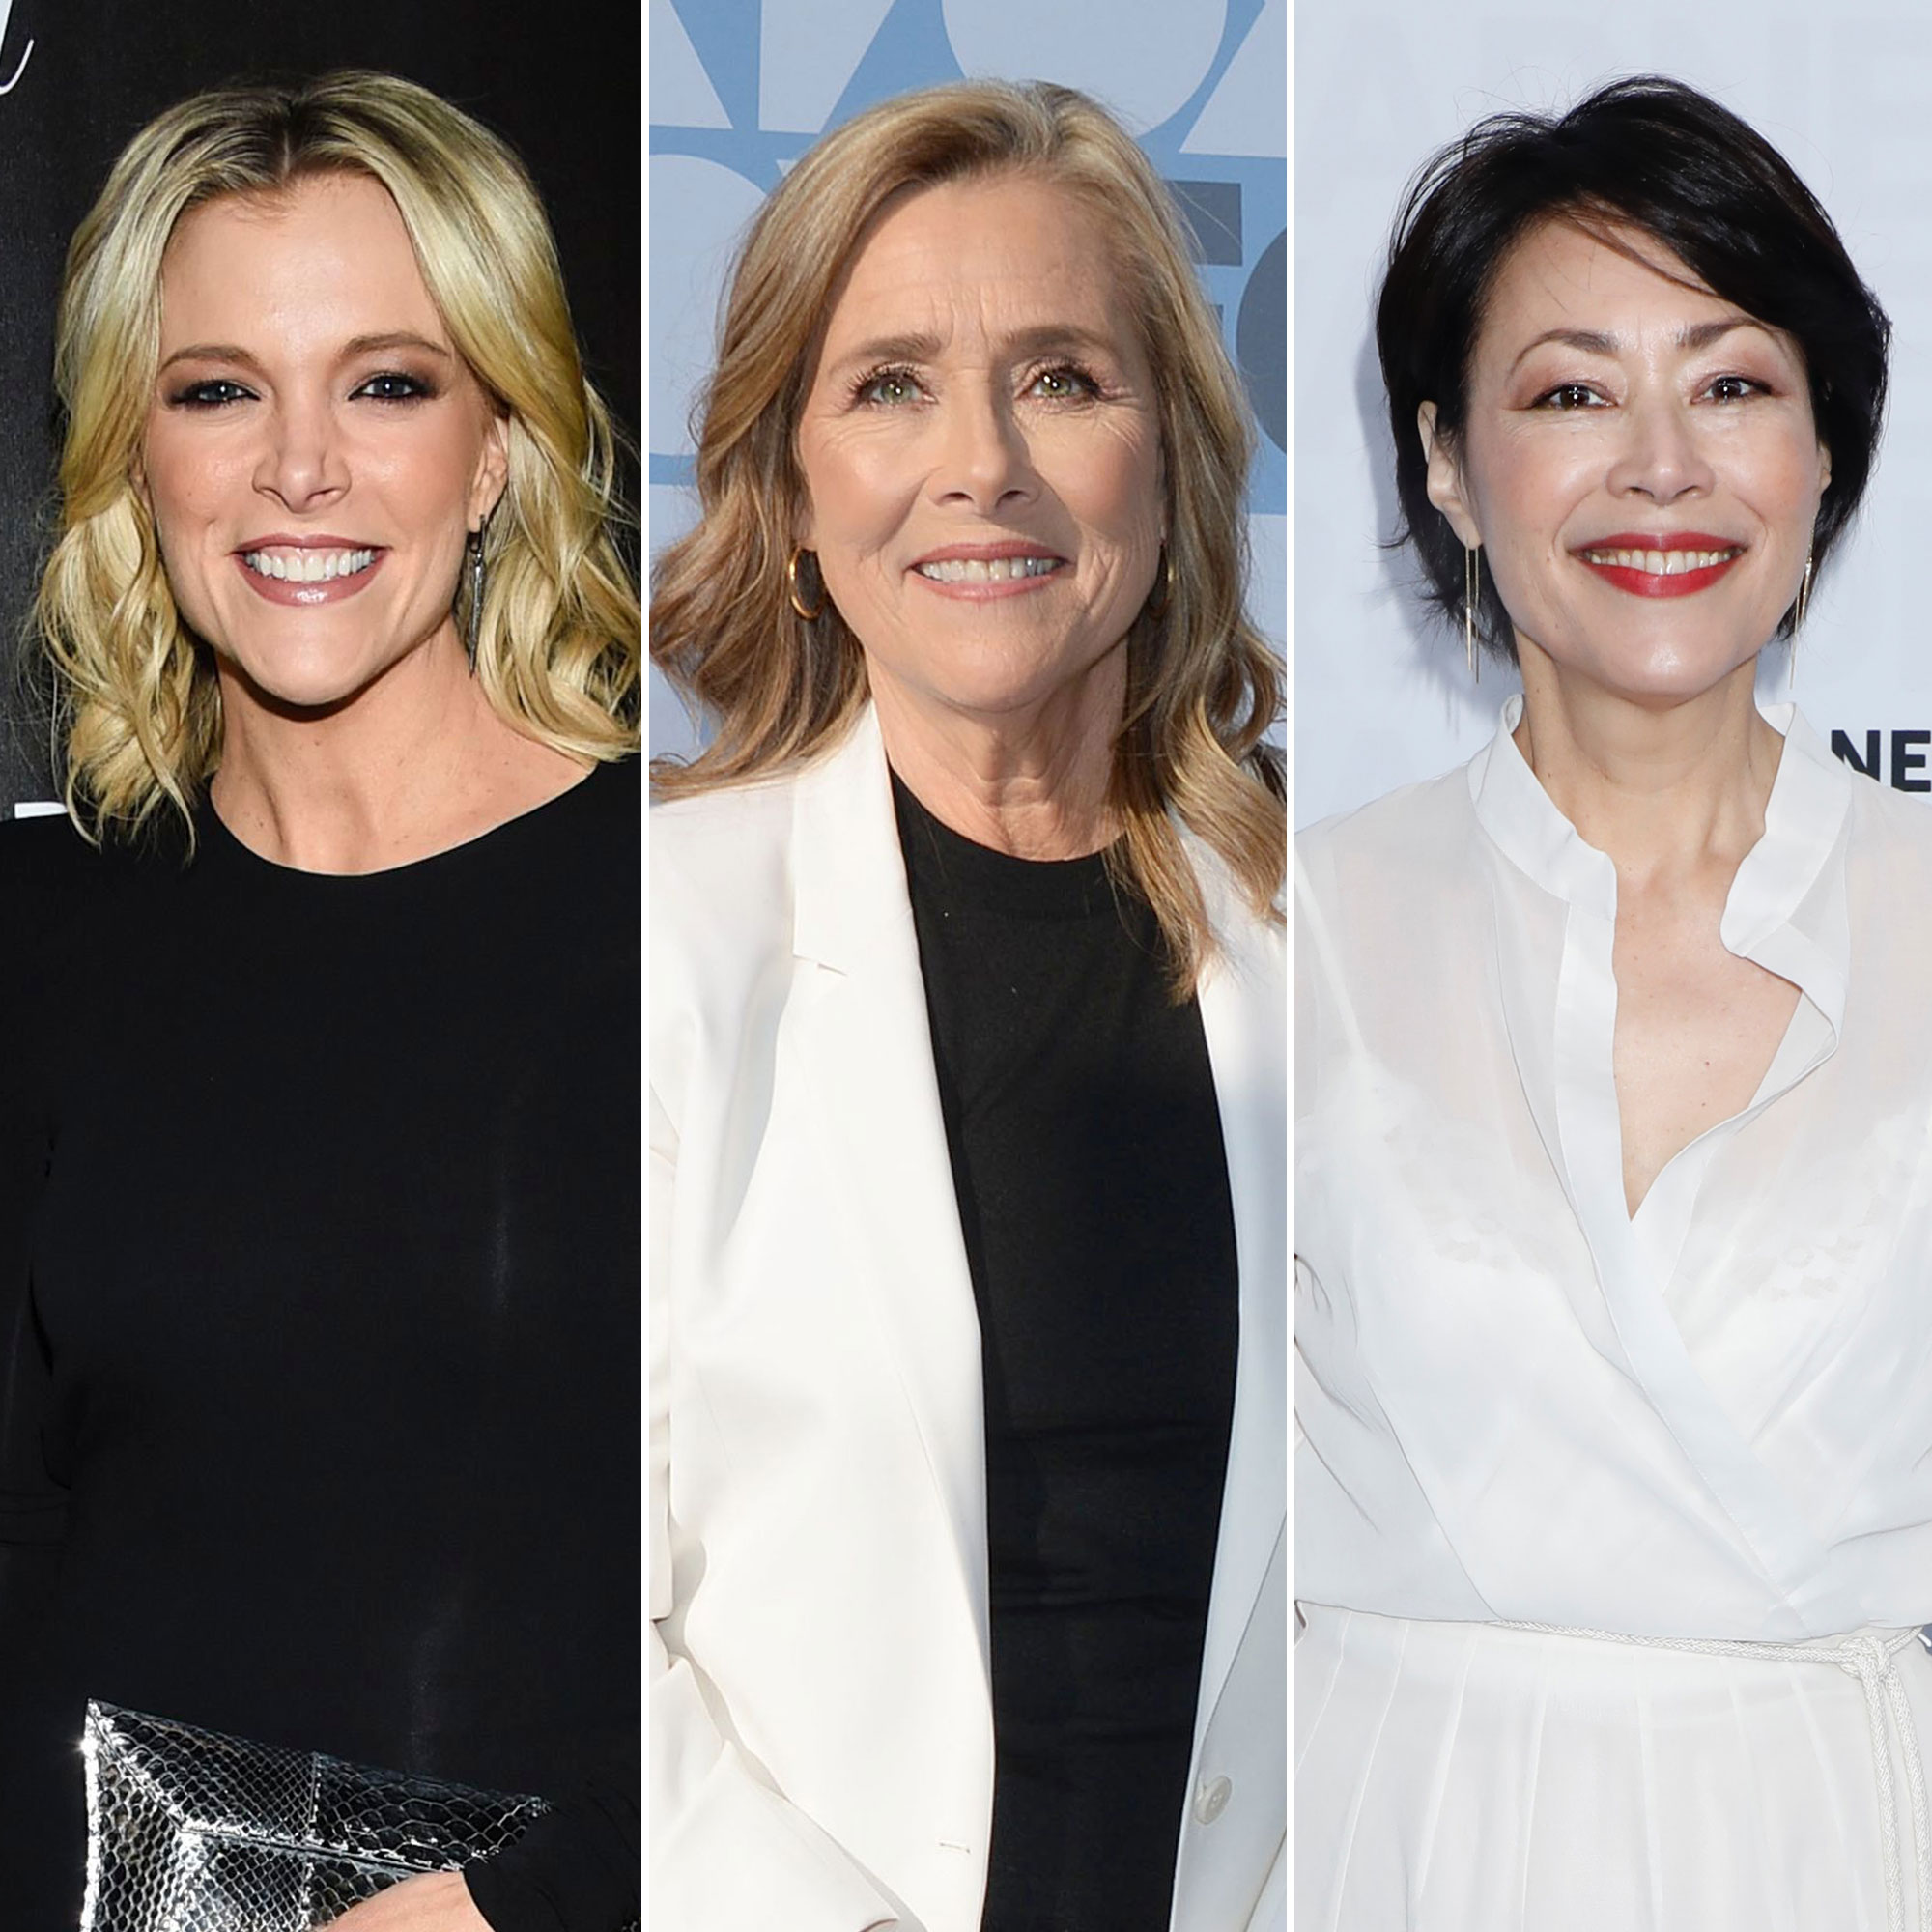 Megyn Kelly Applauds Former 'Today' Hosts for Supporting Women